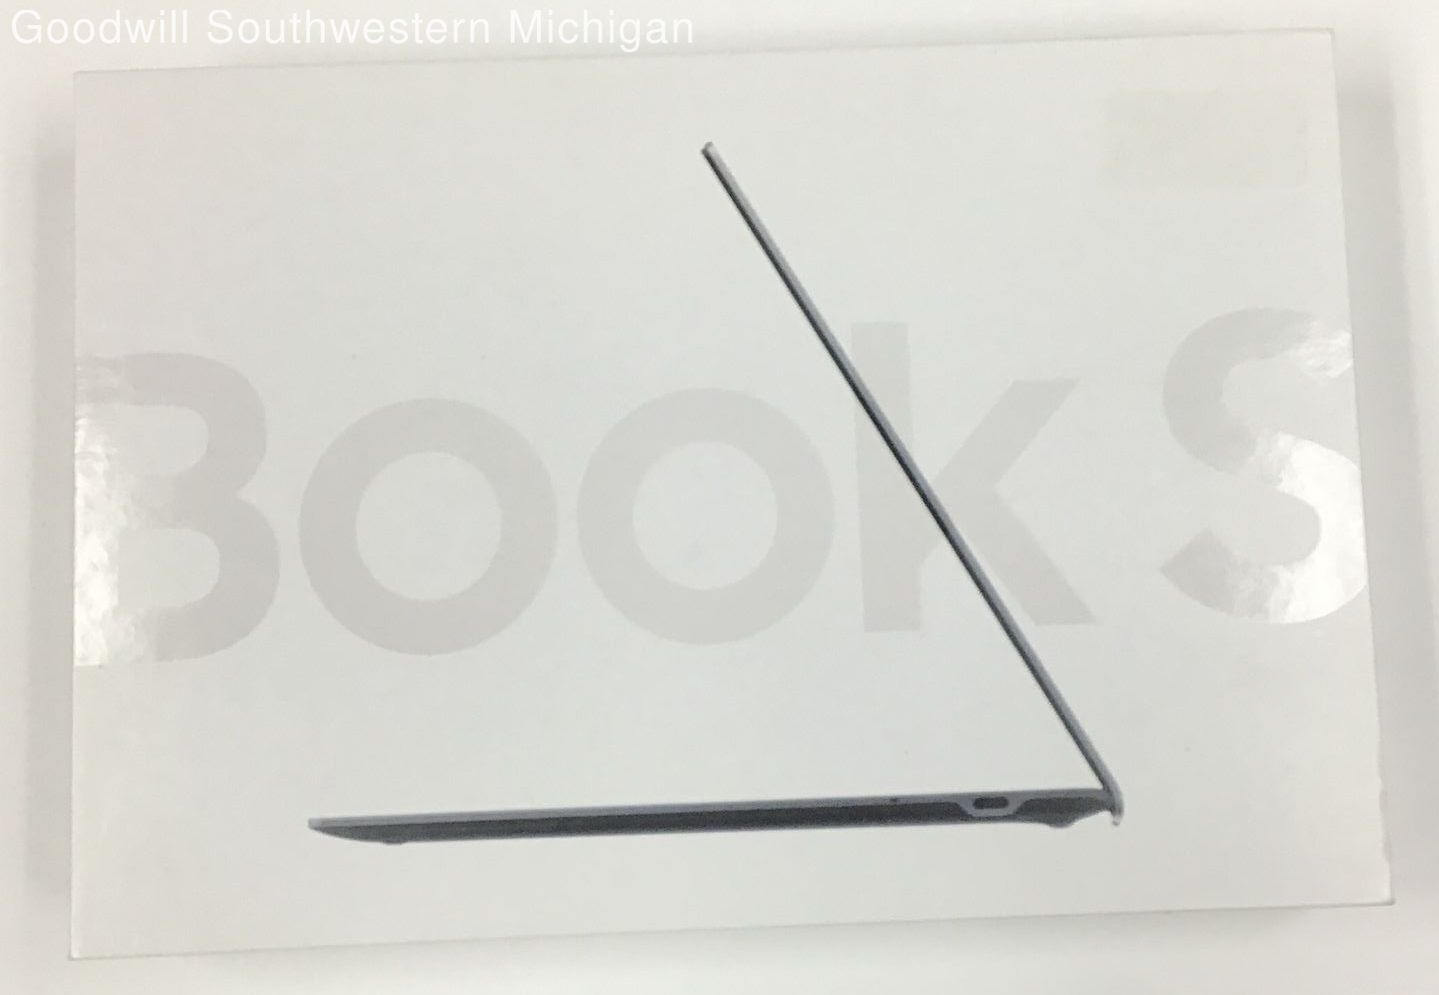 Samsung Galaxy Book S - PreOwned/Used - Powers On - Dmgs/Missing Items - *READ